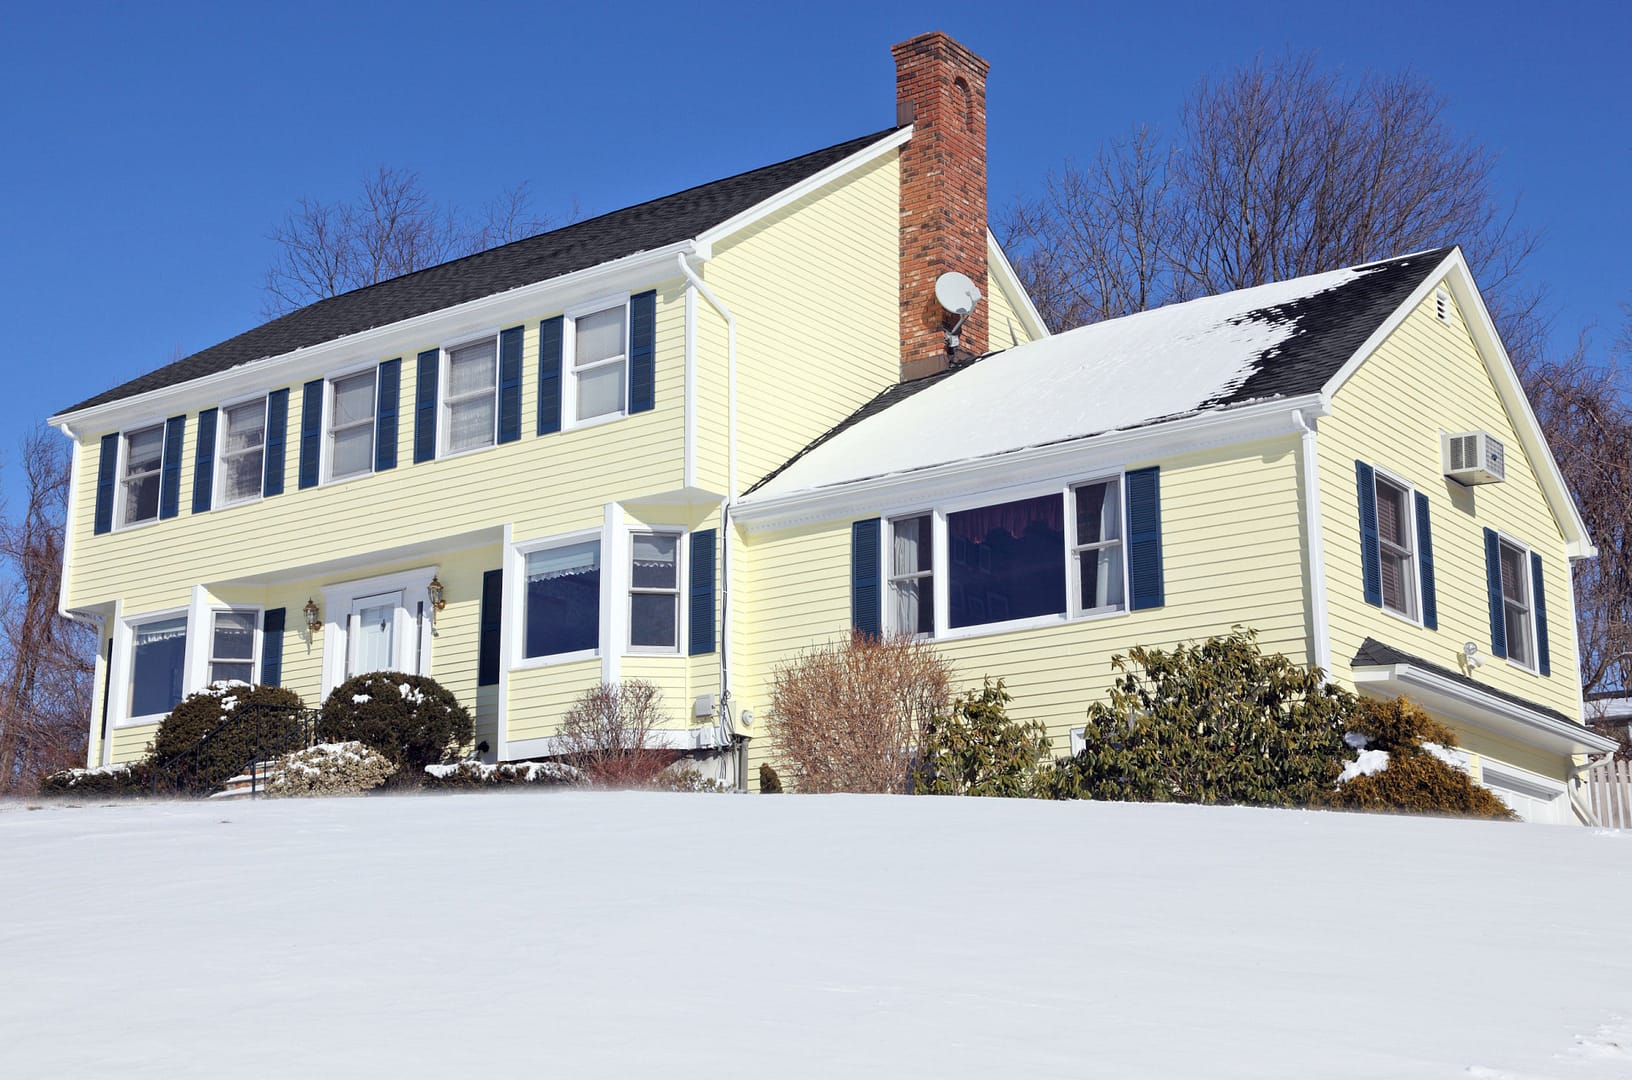 American house with snowy roof - roofing companies in Baltimore county - Home Crafters